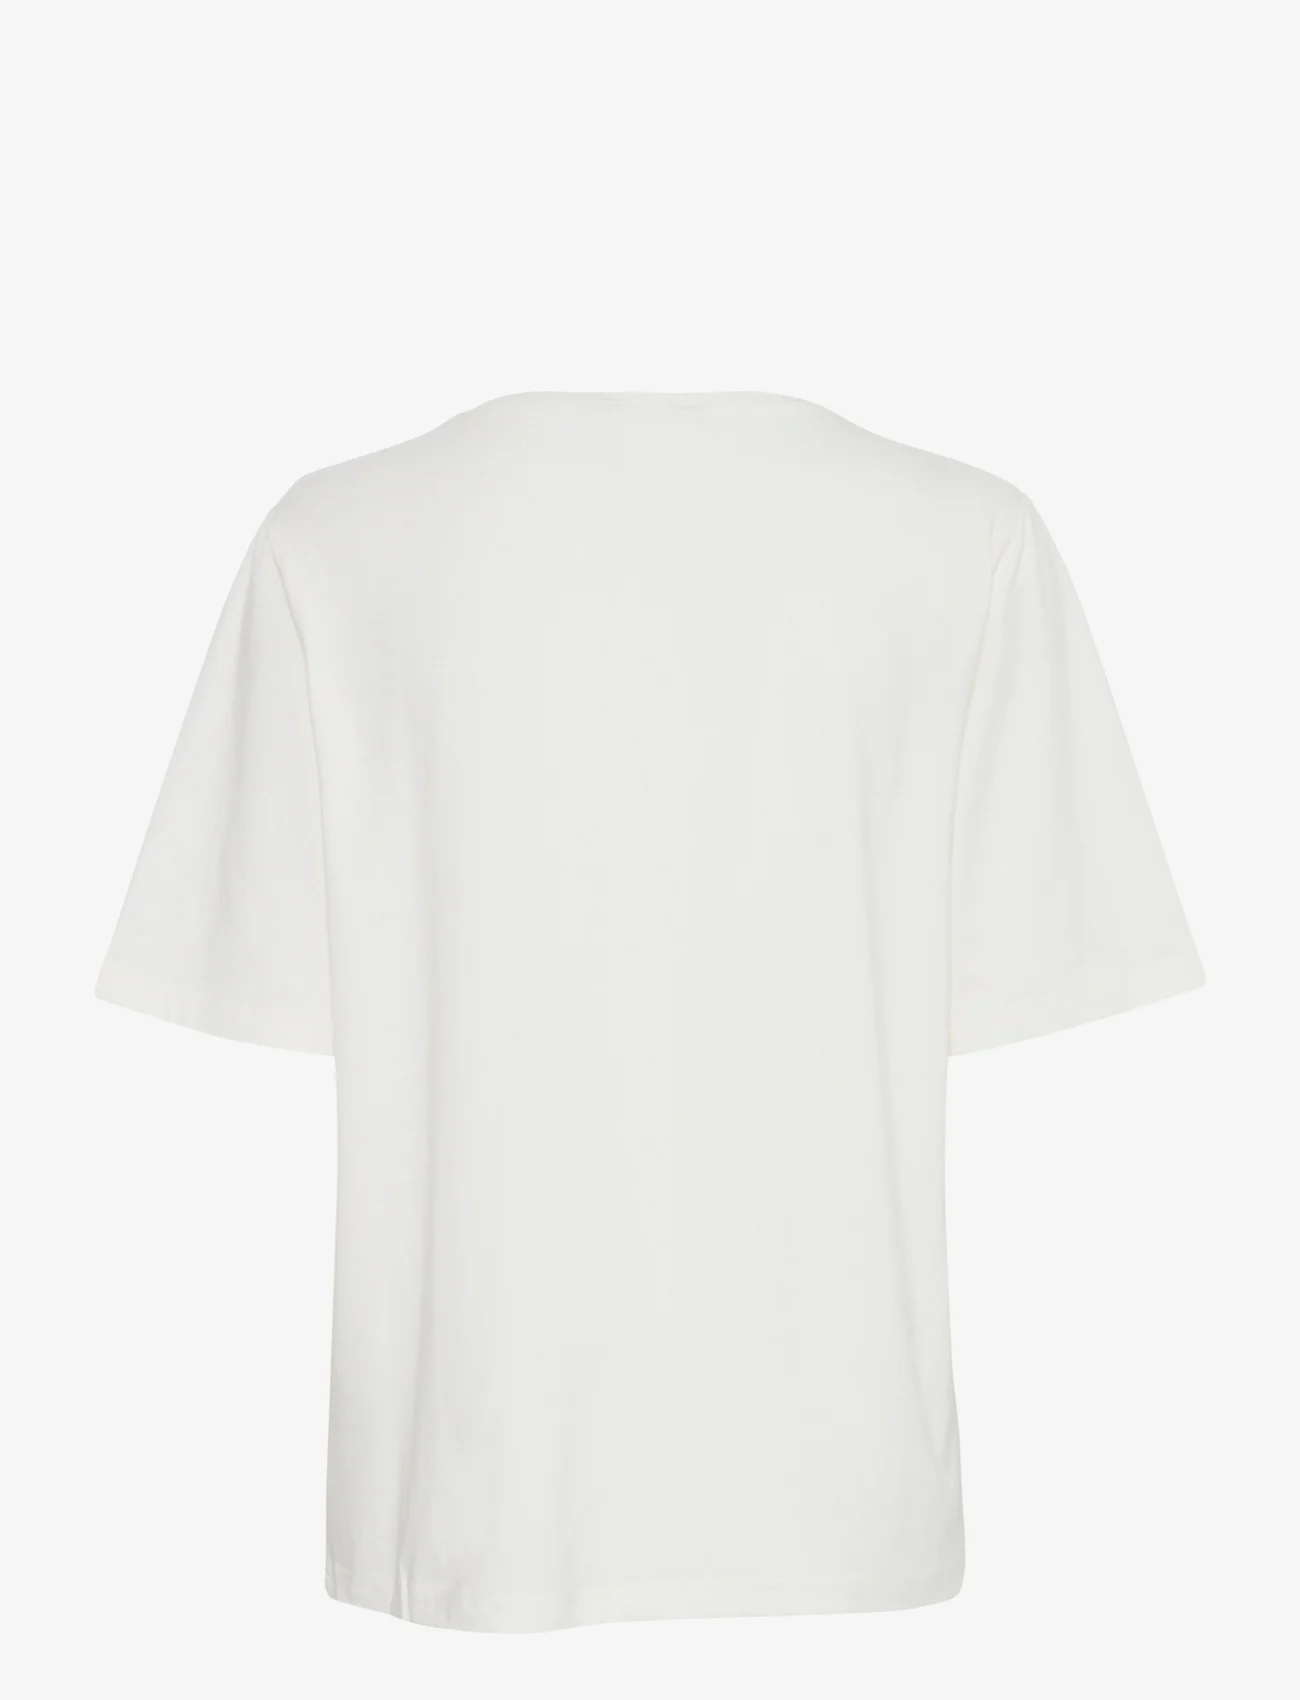 b.young - BYPAMILA HALF SL TSHIRT 2 - - lowest prices - off white - 1